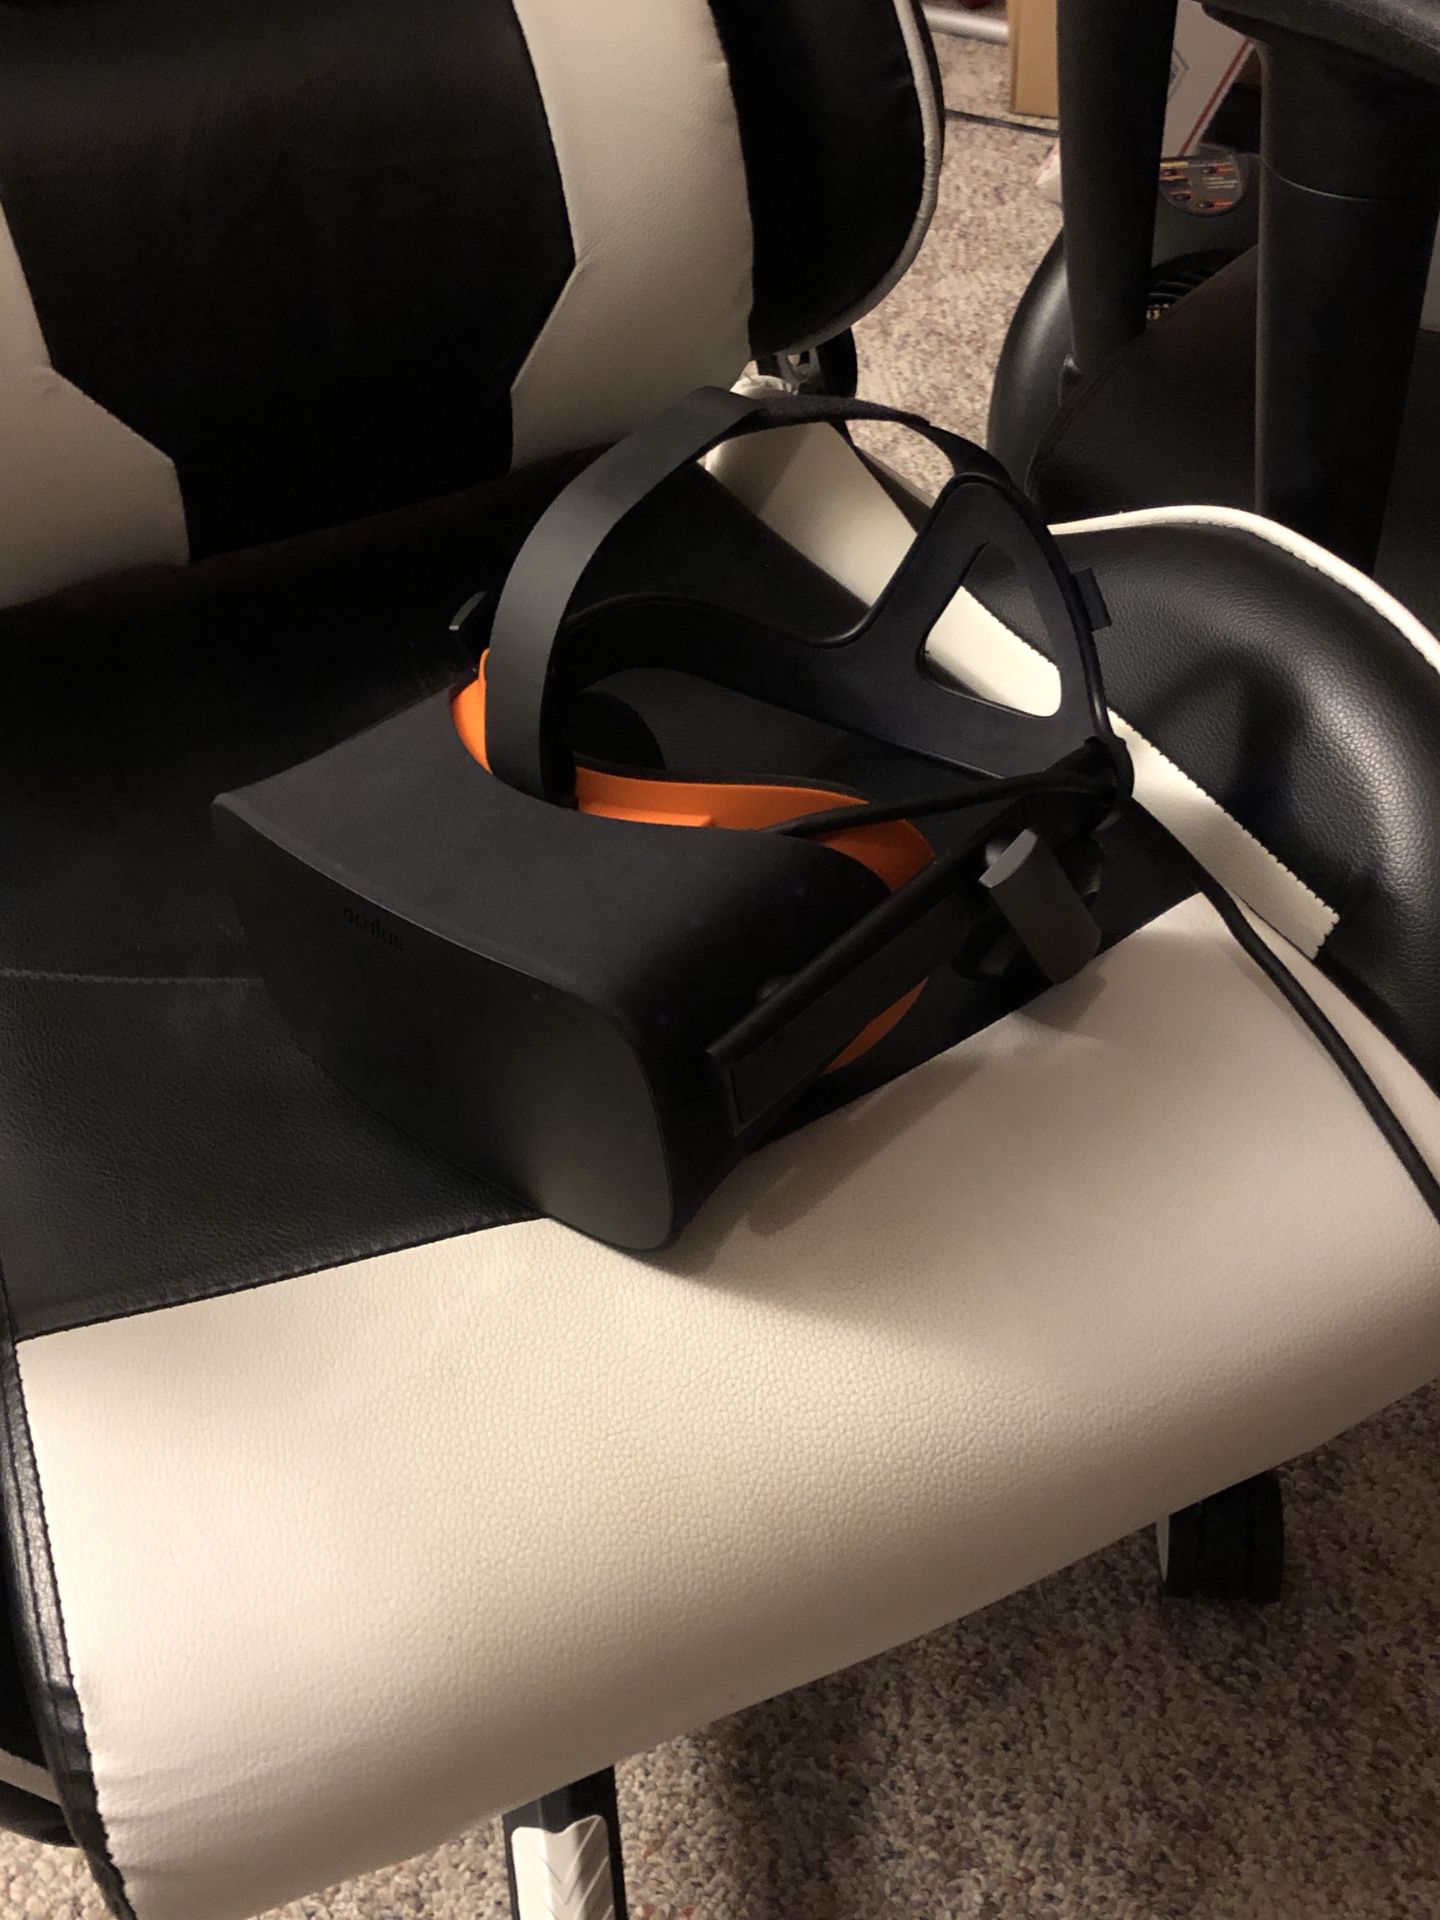 Oculus rift VR with two sensors